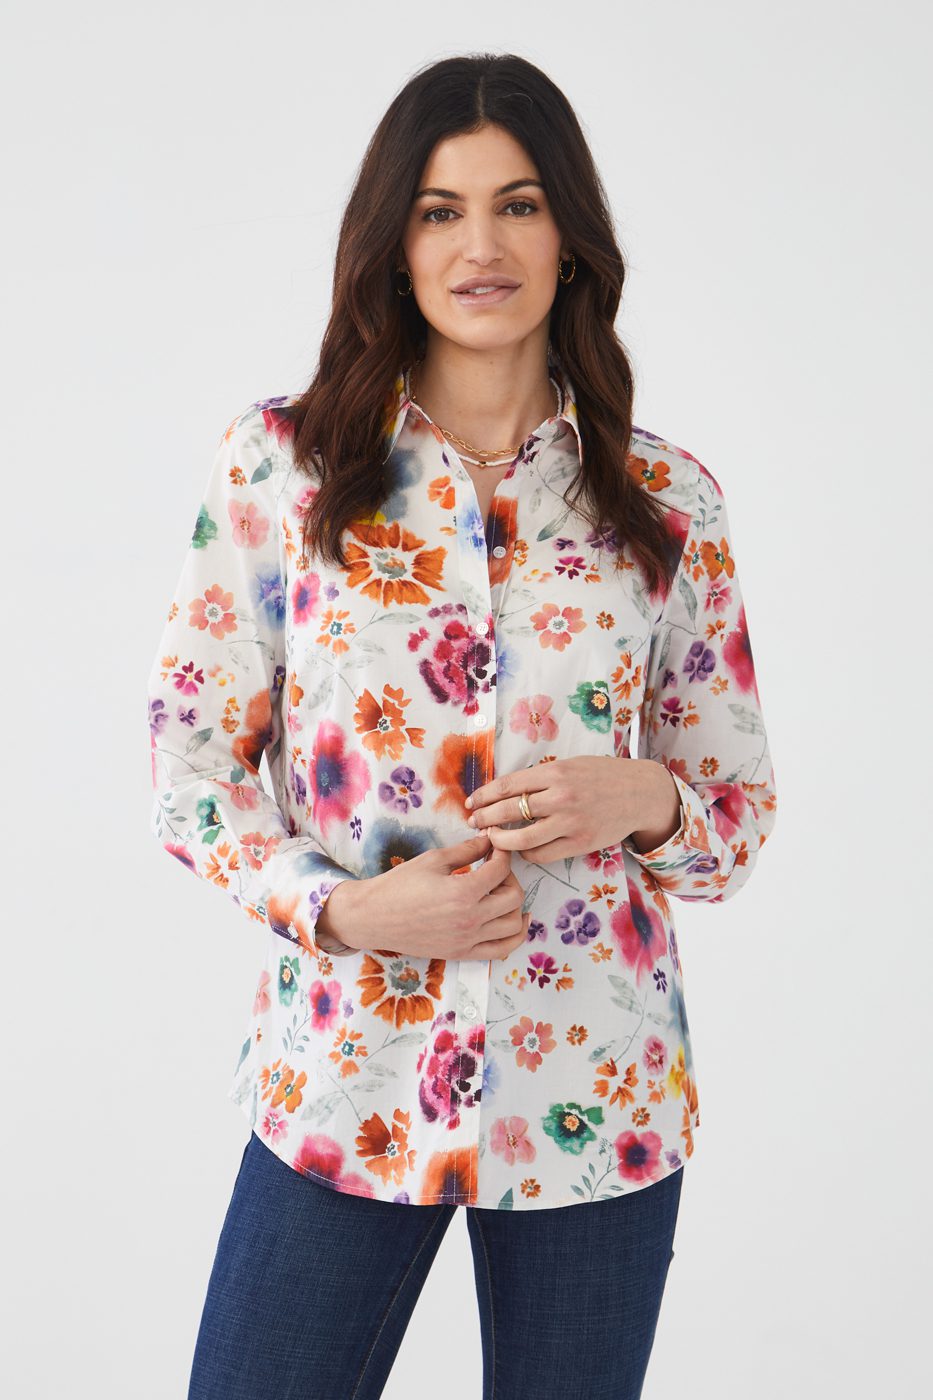 This vibrant top is a must-have for the upcoming seasons of spring and summer. Featuring a bold floral print set against a crisp white background, this long sleeve shirt can be dressed up or down with ease. Simply tie it at the waist and pair with shorts for a casual look or elevate an outfit by pairing with trousers for a standout office ensemble.